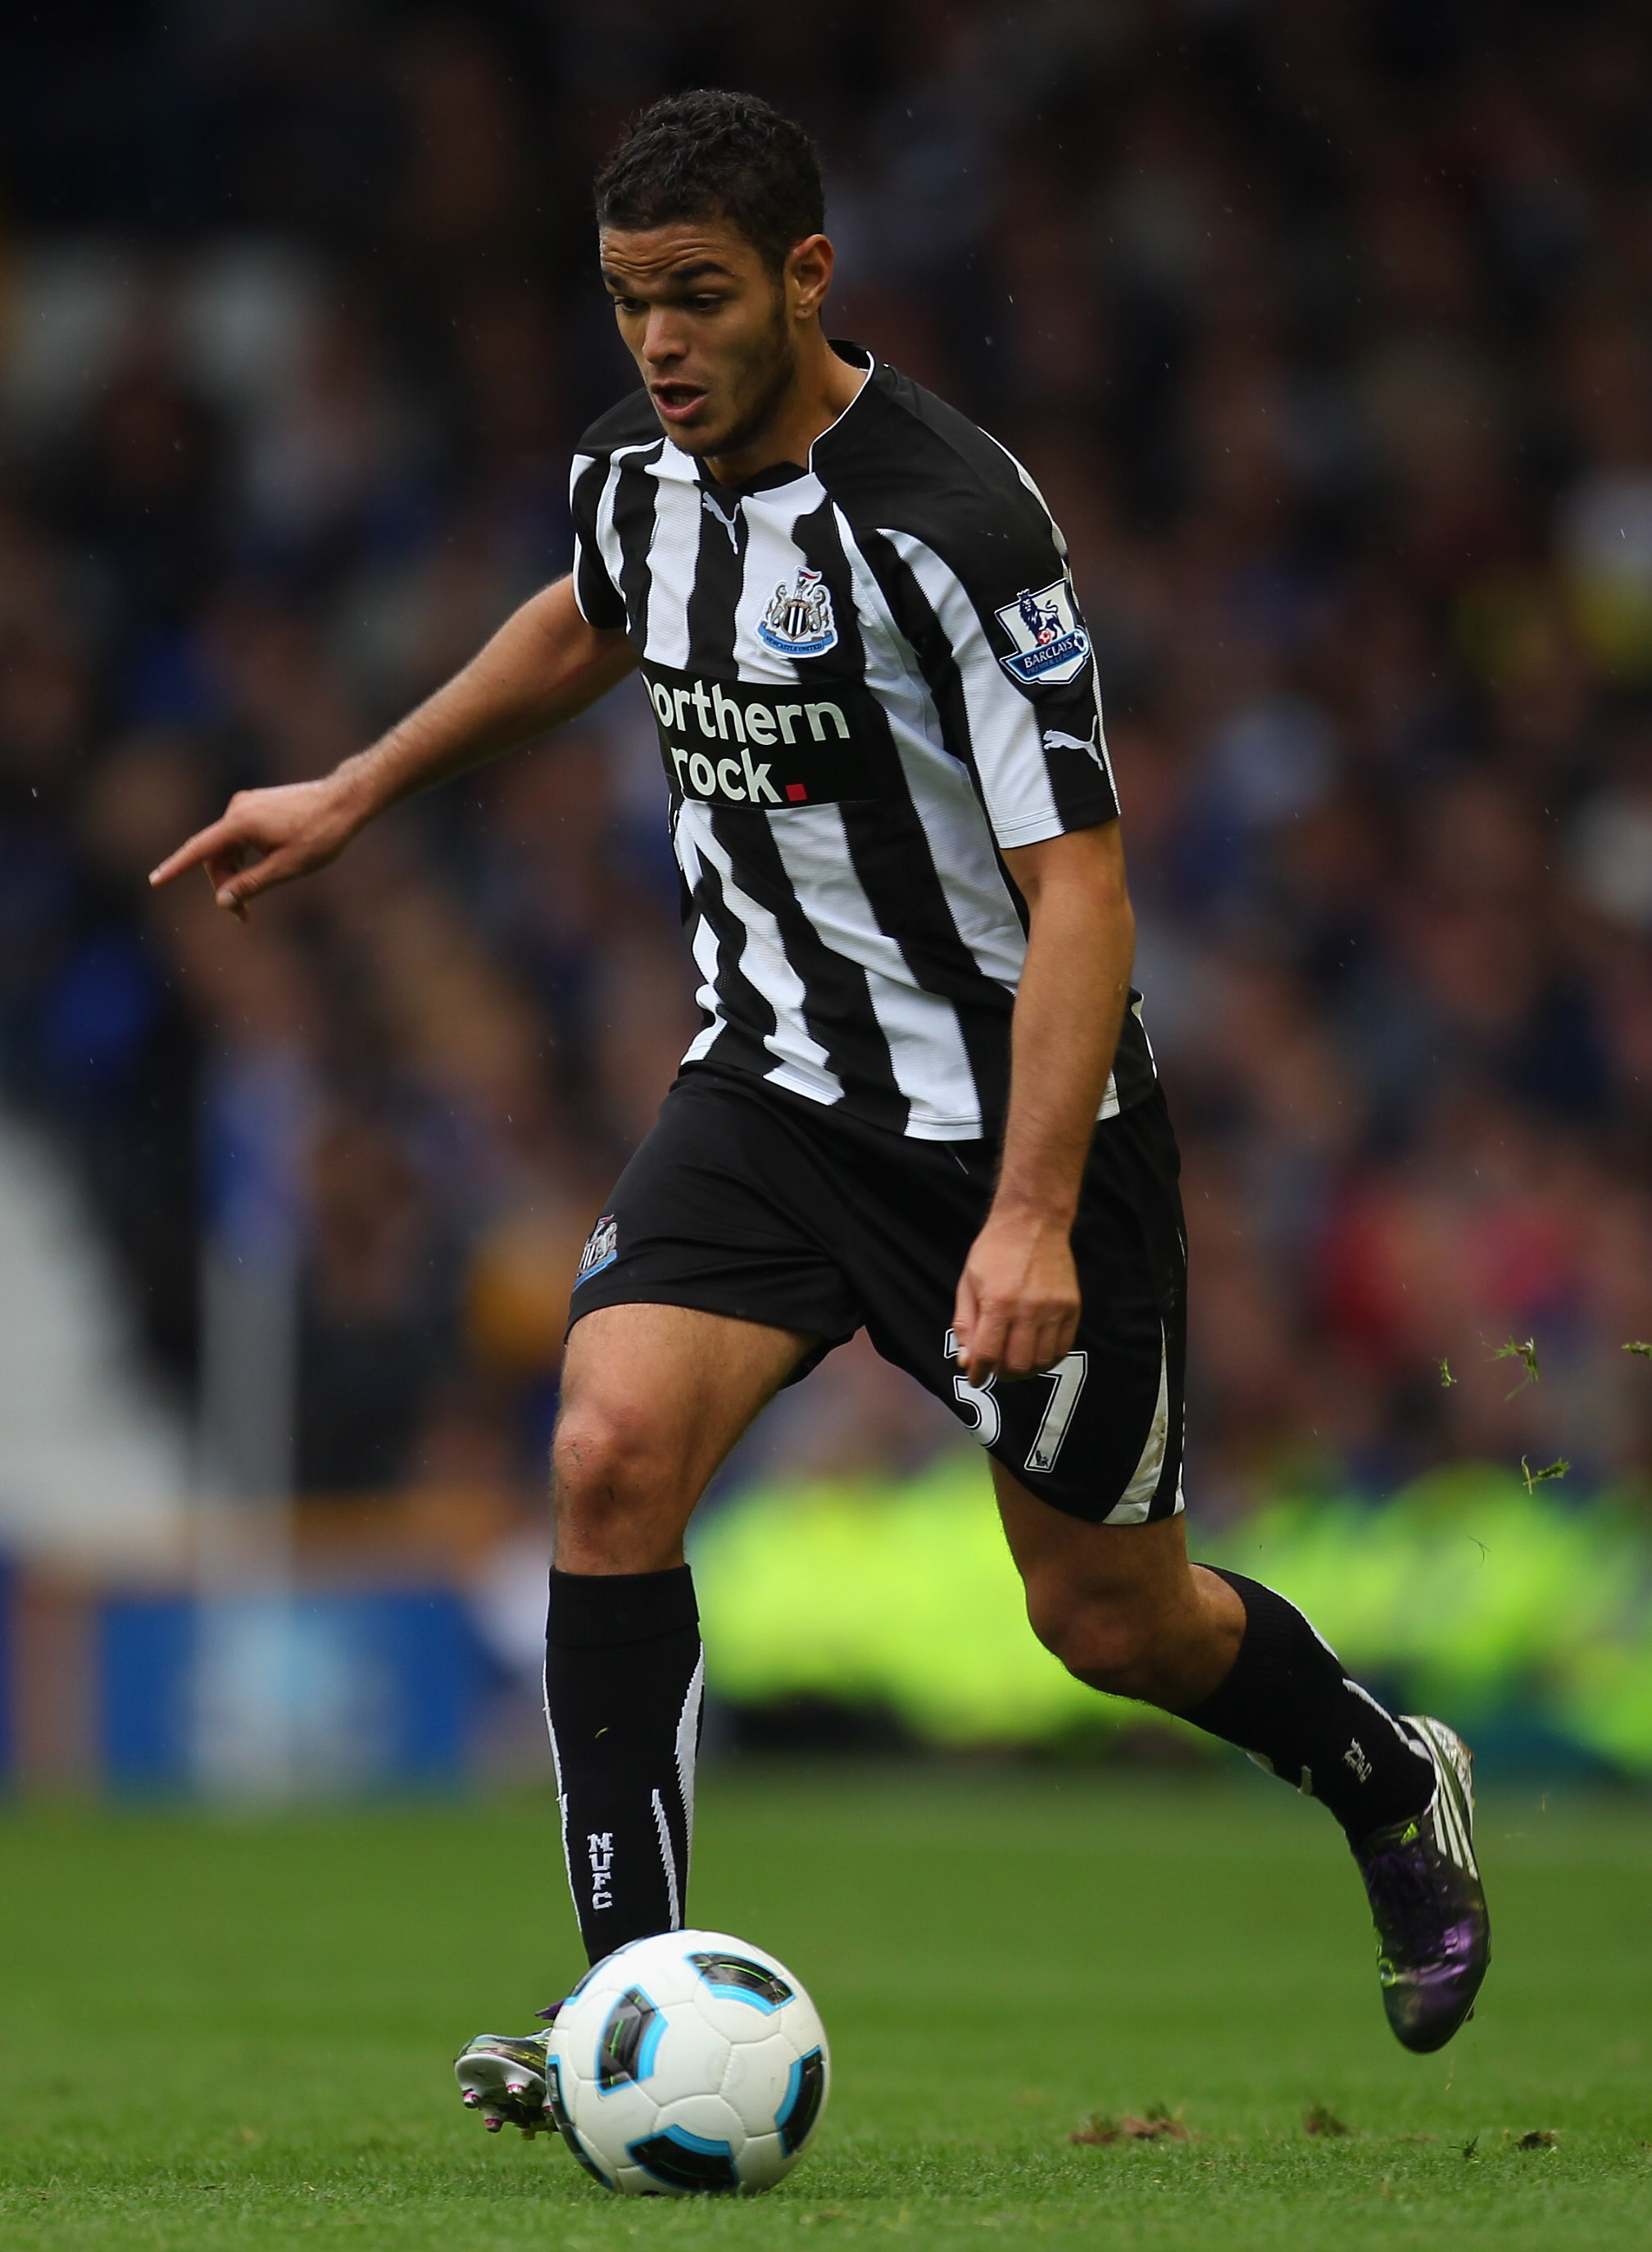 LIVERPOOL, ENGLAND - SEPTEMBER 18:  Hatem Ben Arfa of Newcastle United in action during the Barclays Premier League match between Everton and Newcastle United at Goodison Park on September 18, 2010 in Liverpool, England.  (Photo by Alex Livesey/Getty Imag